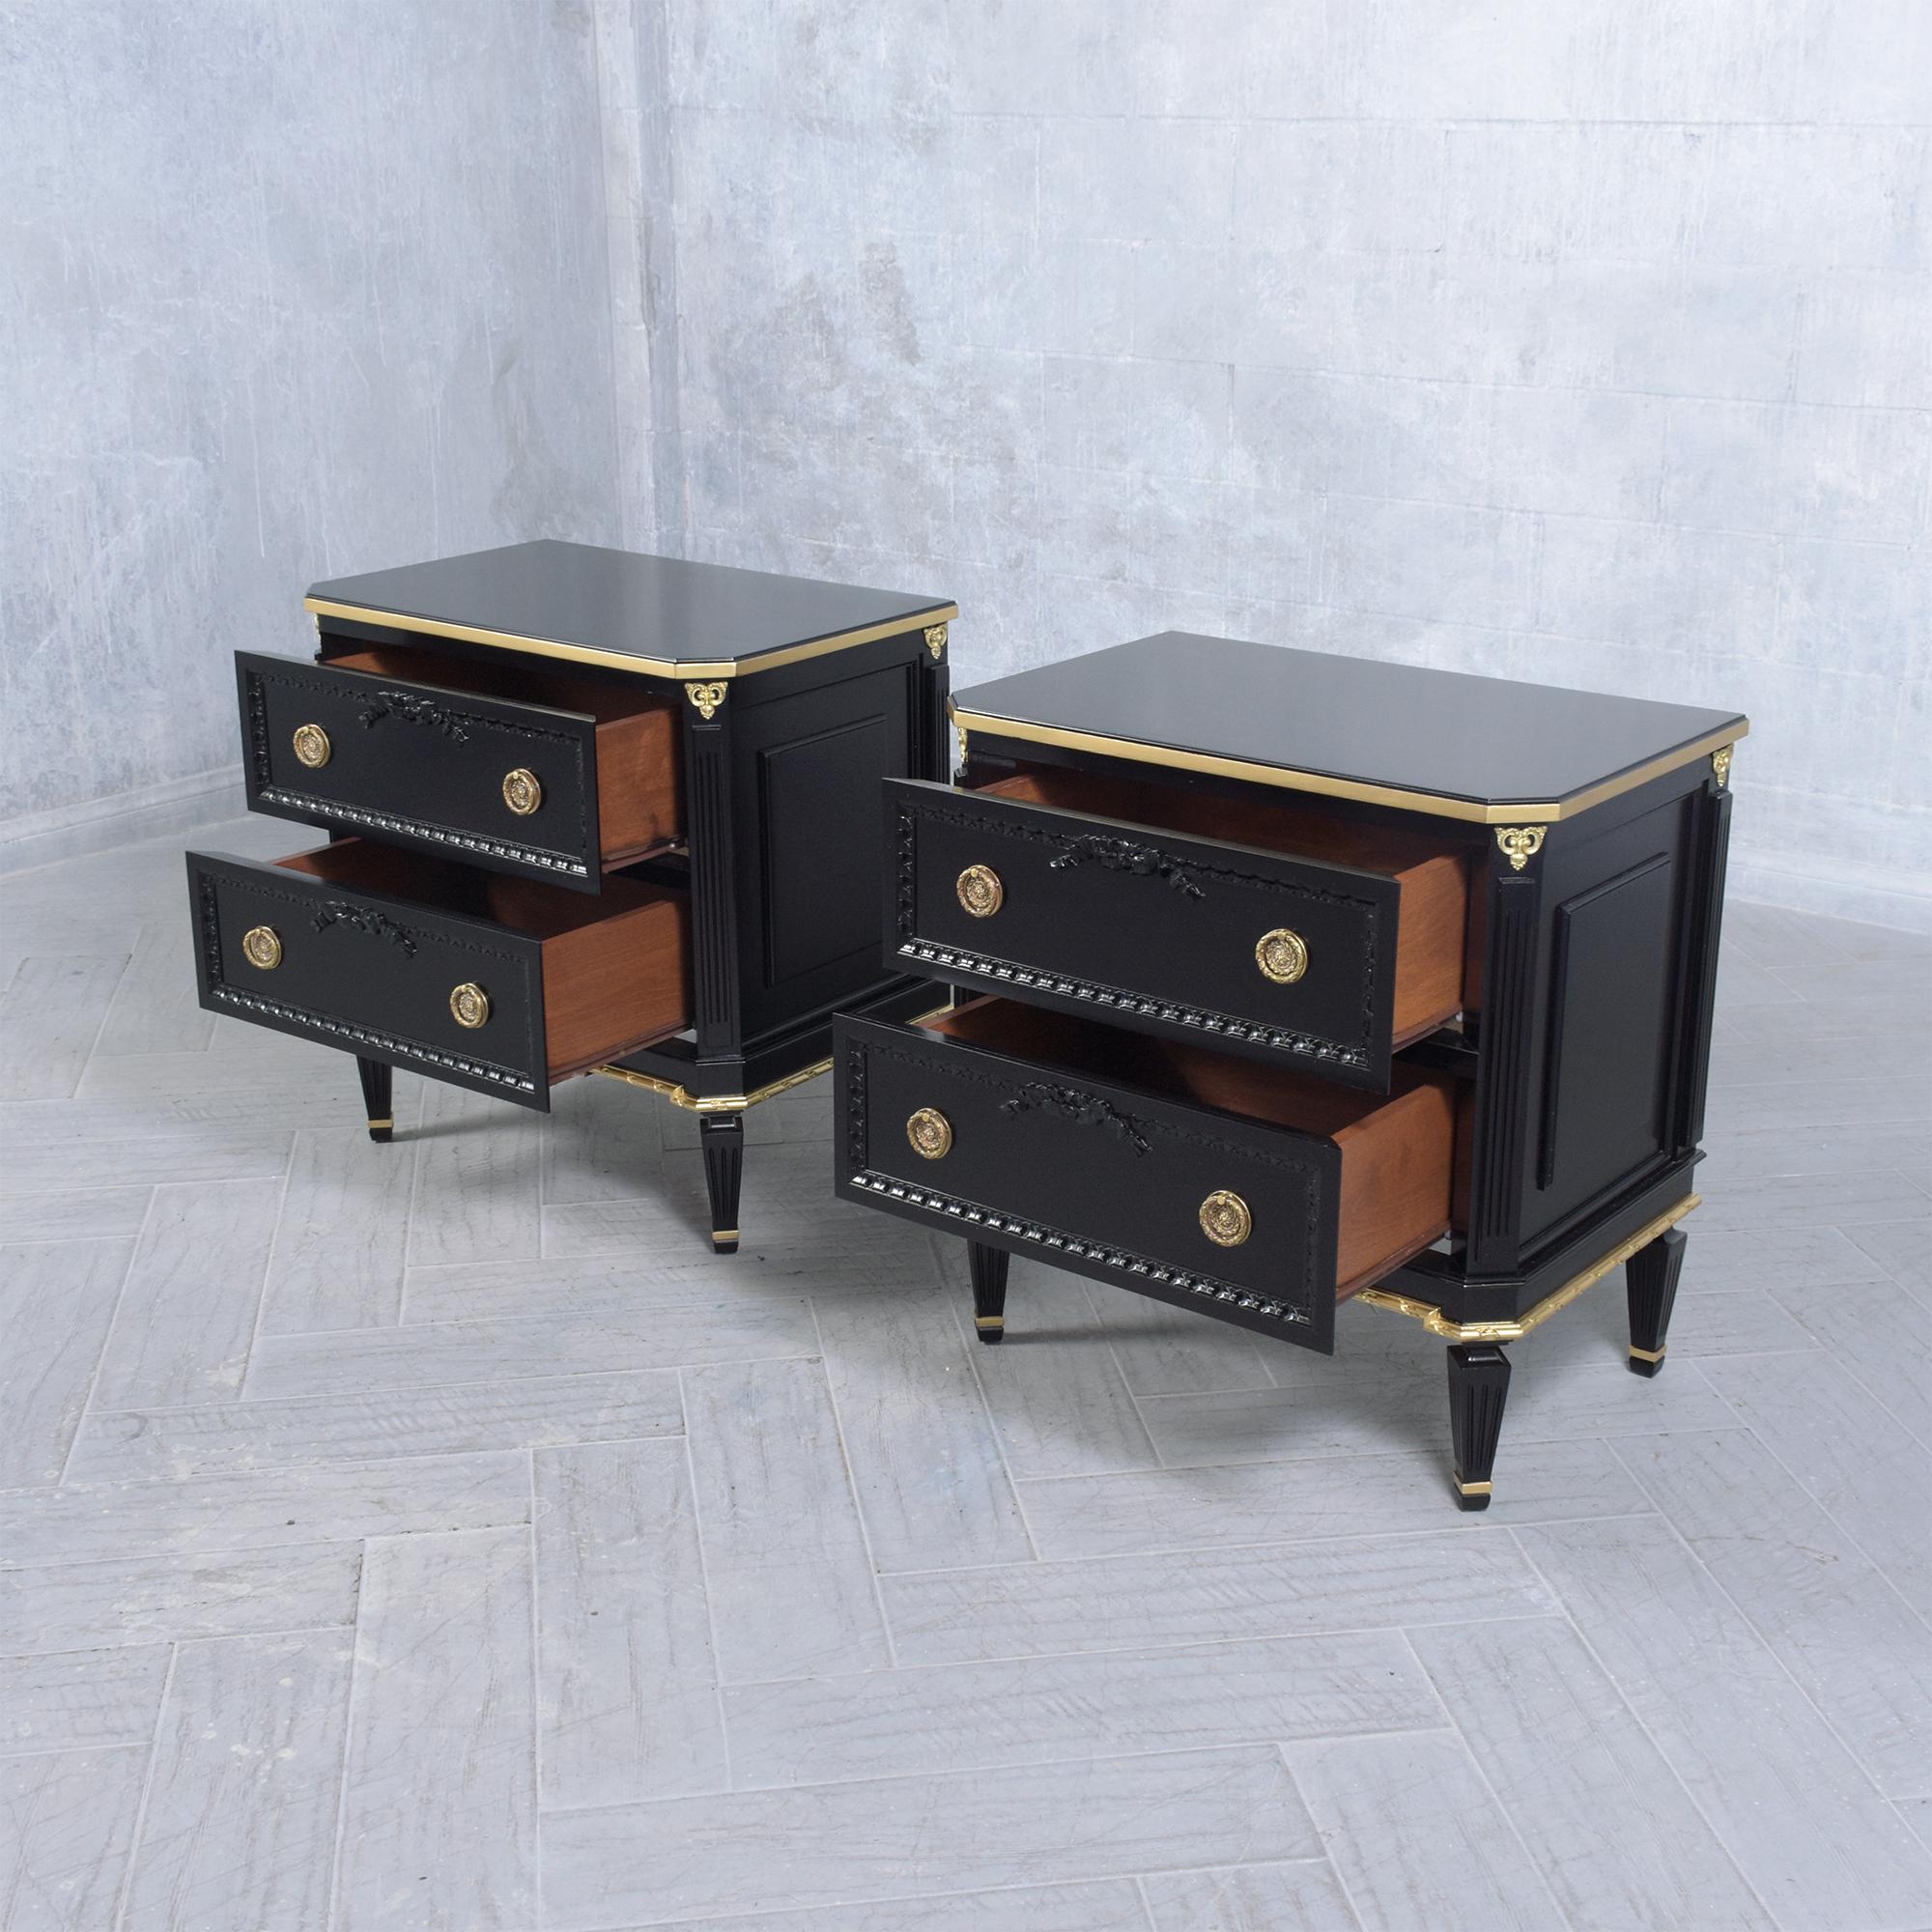 Late 20th Century Vintage Louis XVI Mahogany Commodes: Timeless Nightstands for the Modern Home